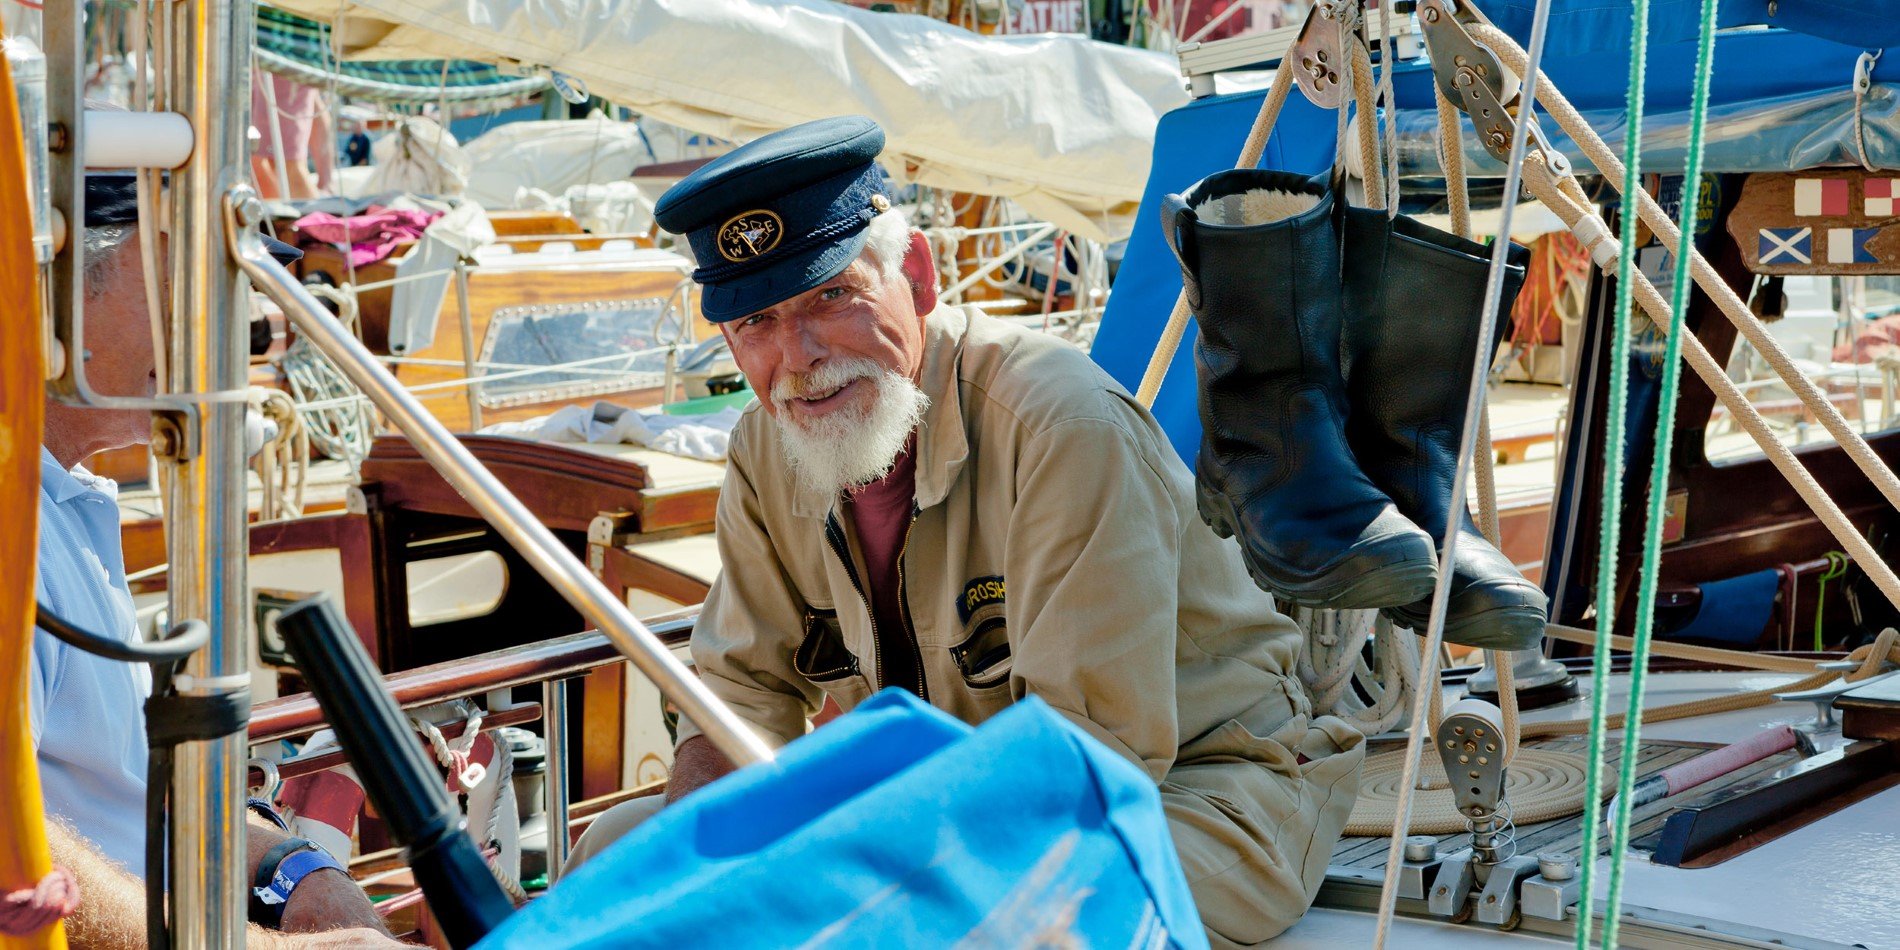 Sailor with white beard and blue hat on board a ship.